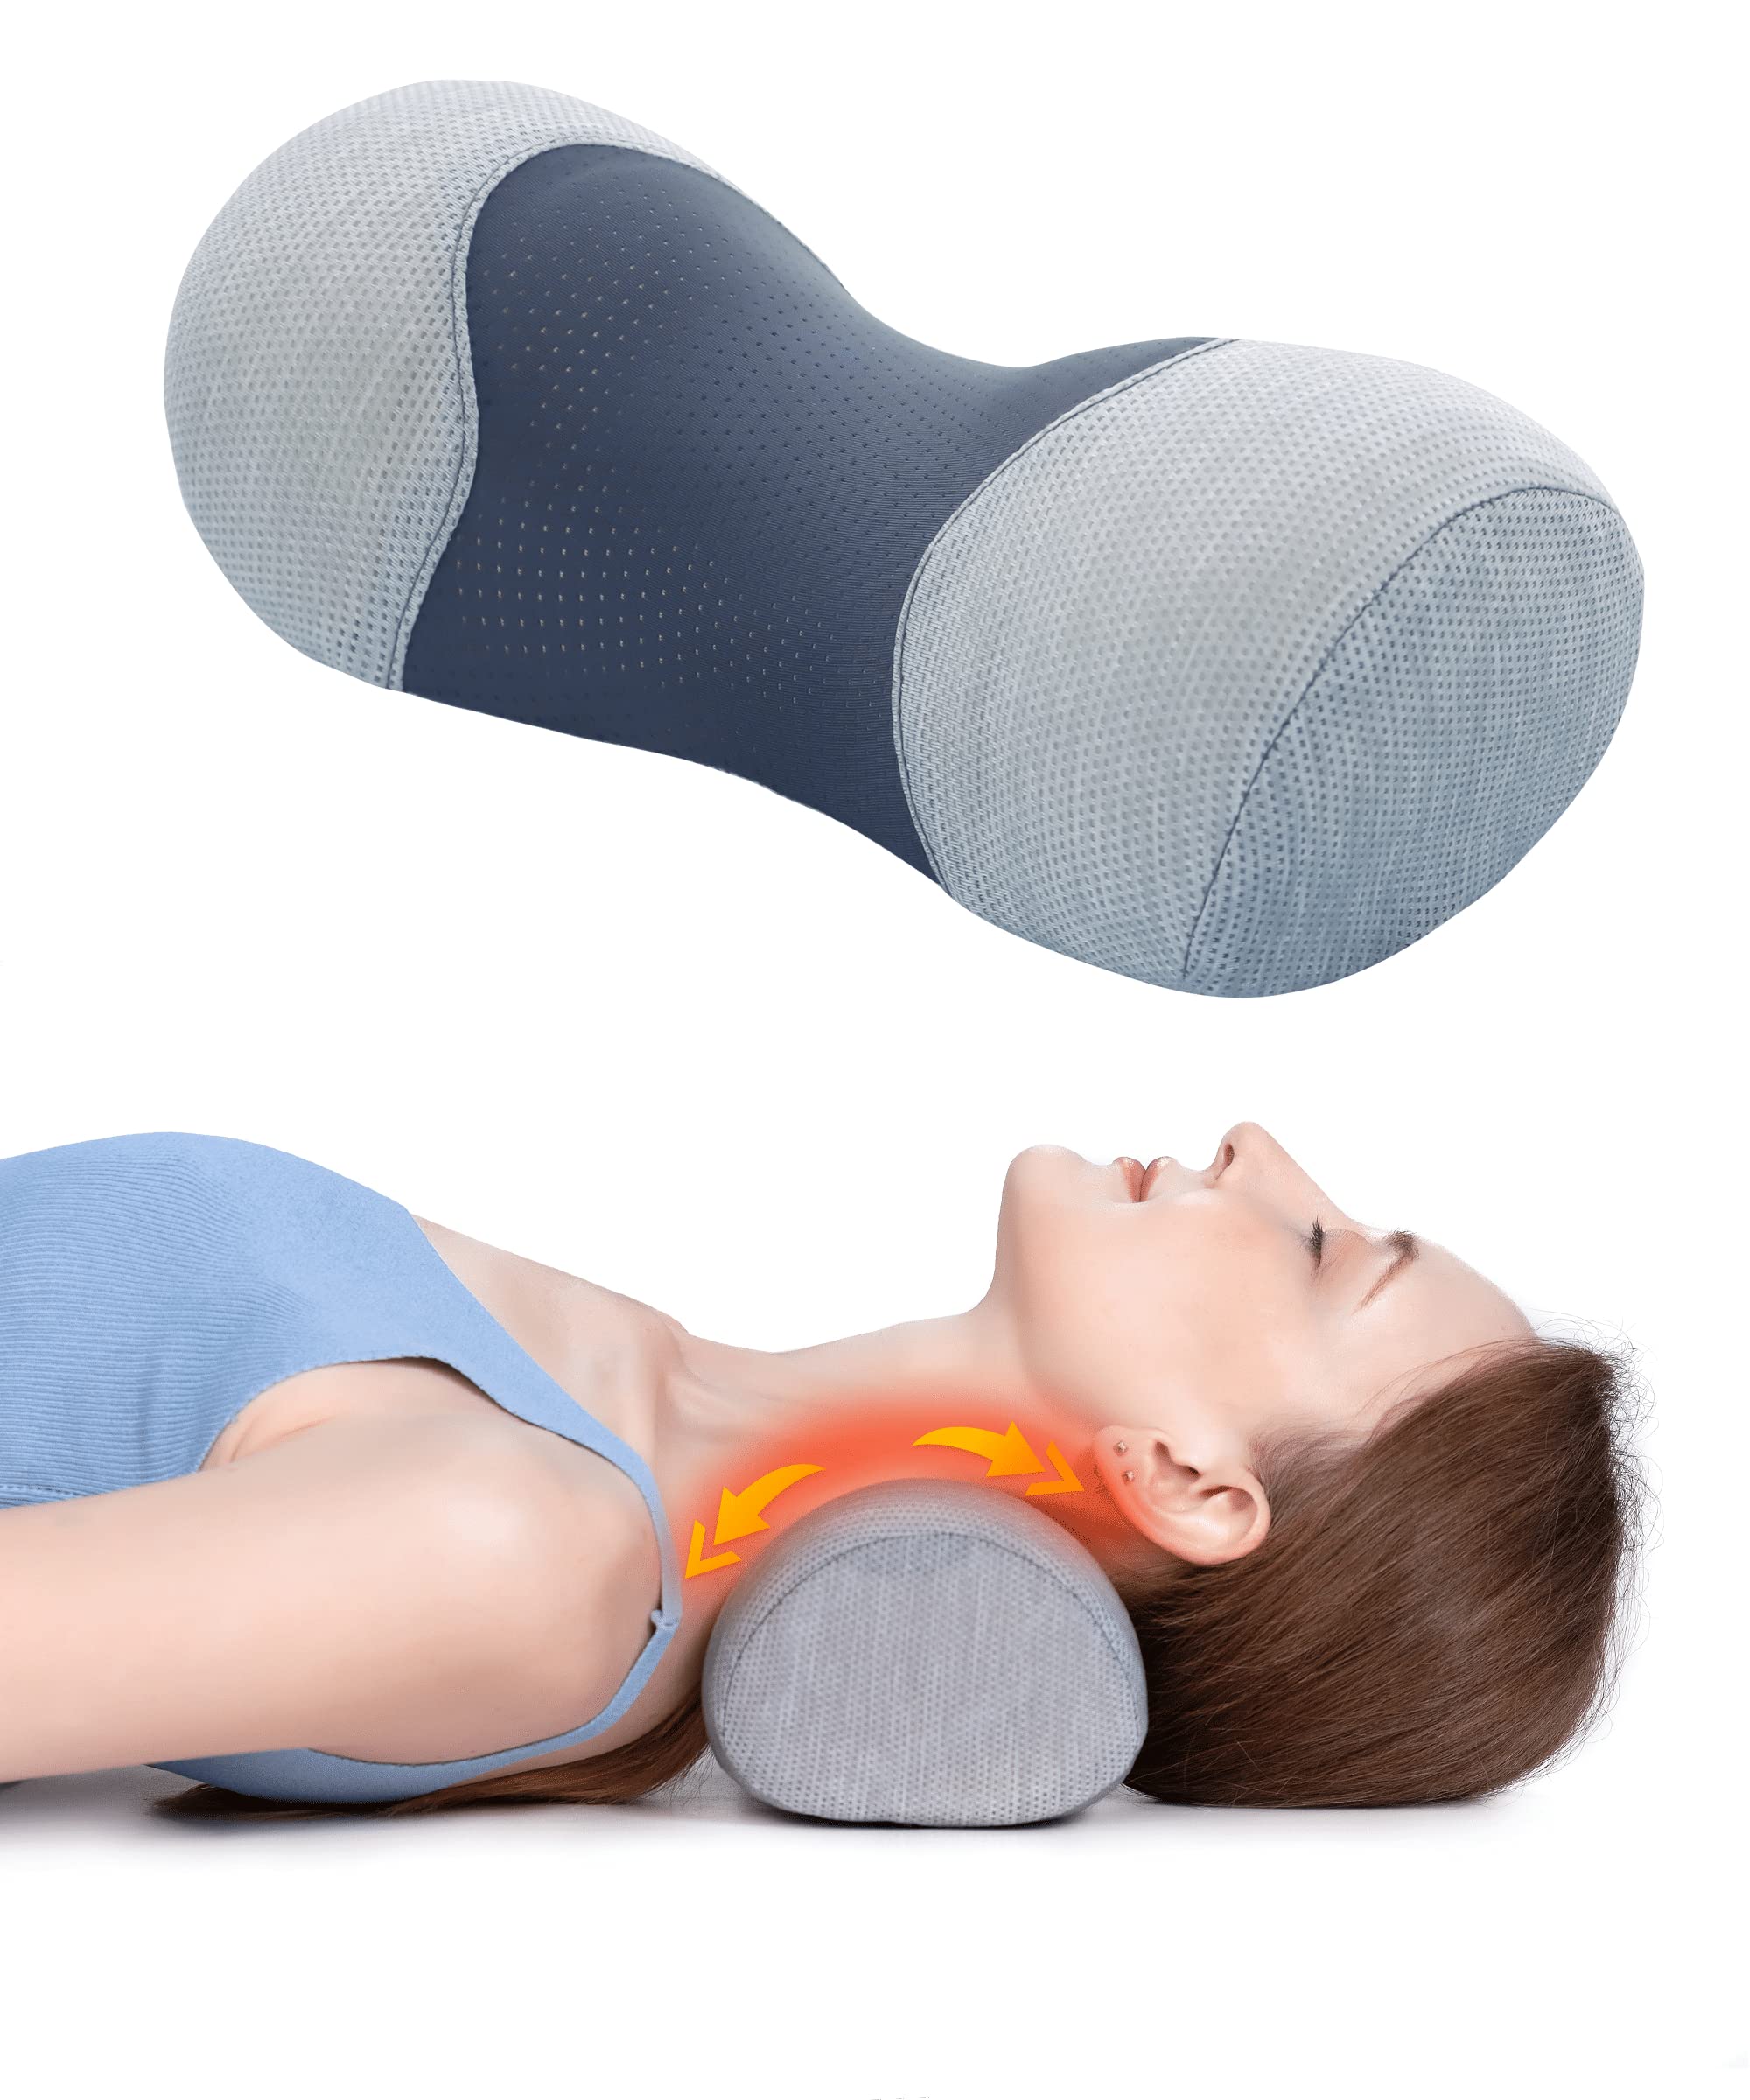 Bespilow Say Goodbye to Neck Pain Small Neck Support Pillow,Cervical Neck Roll Memory Foam Pillow,Cervical Traction Device,Neck Pillows for Tension Muscle Relief,Neck & Shoulder Pain Relaxer